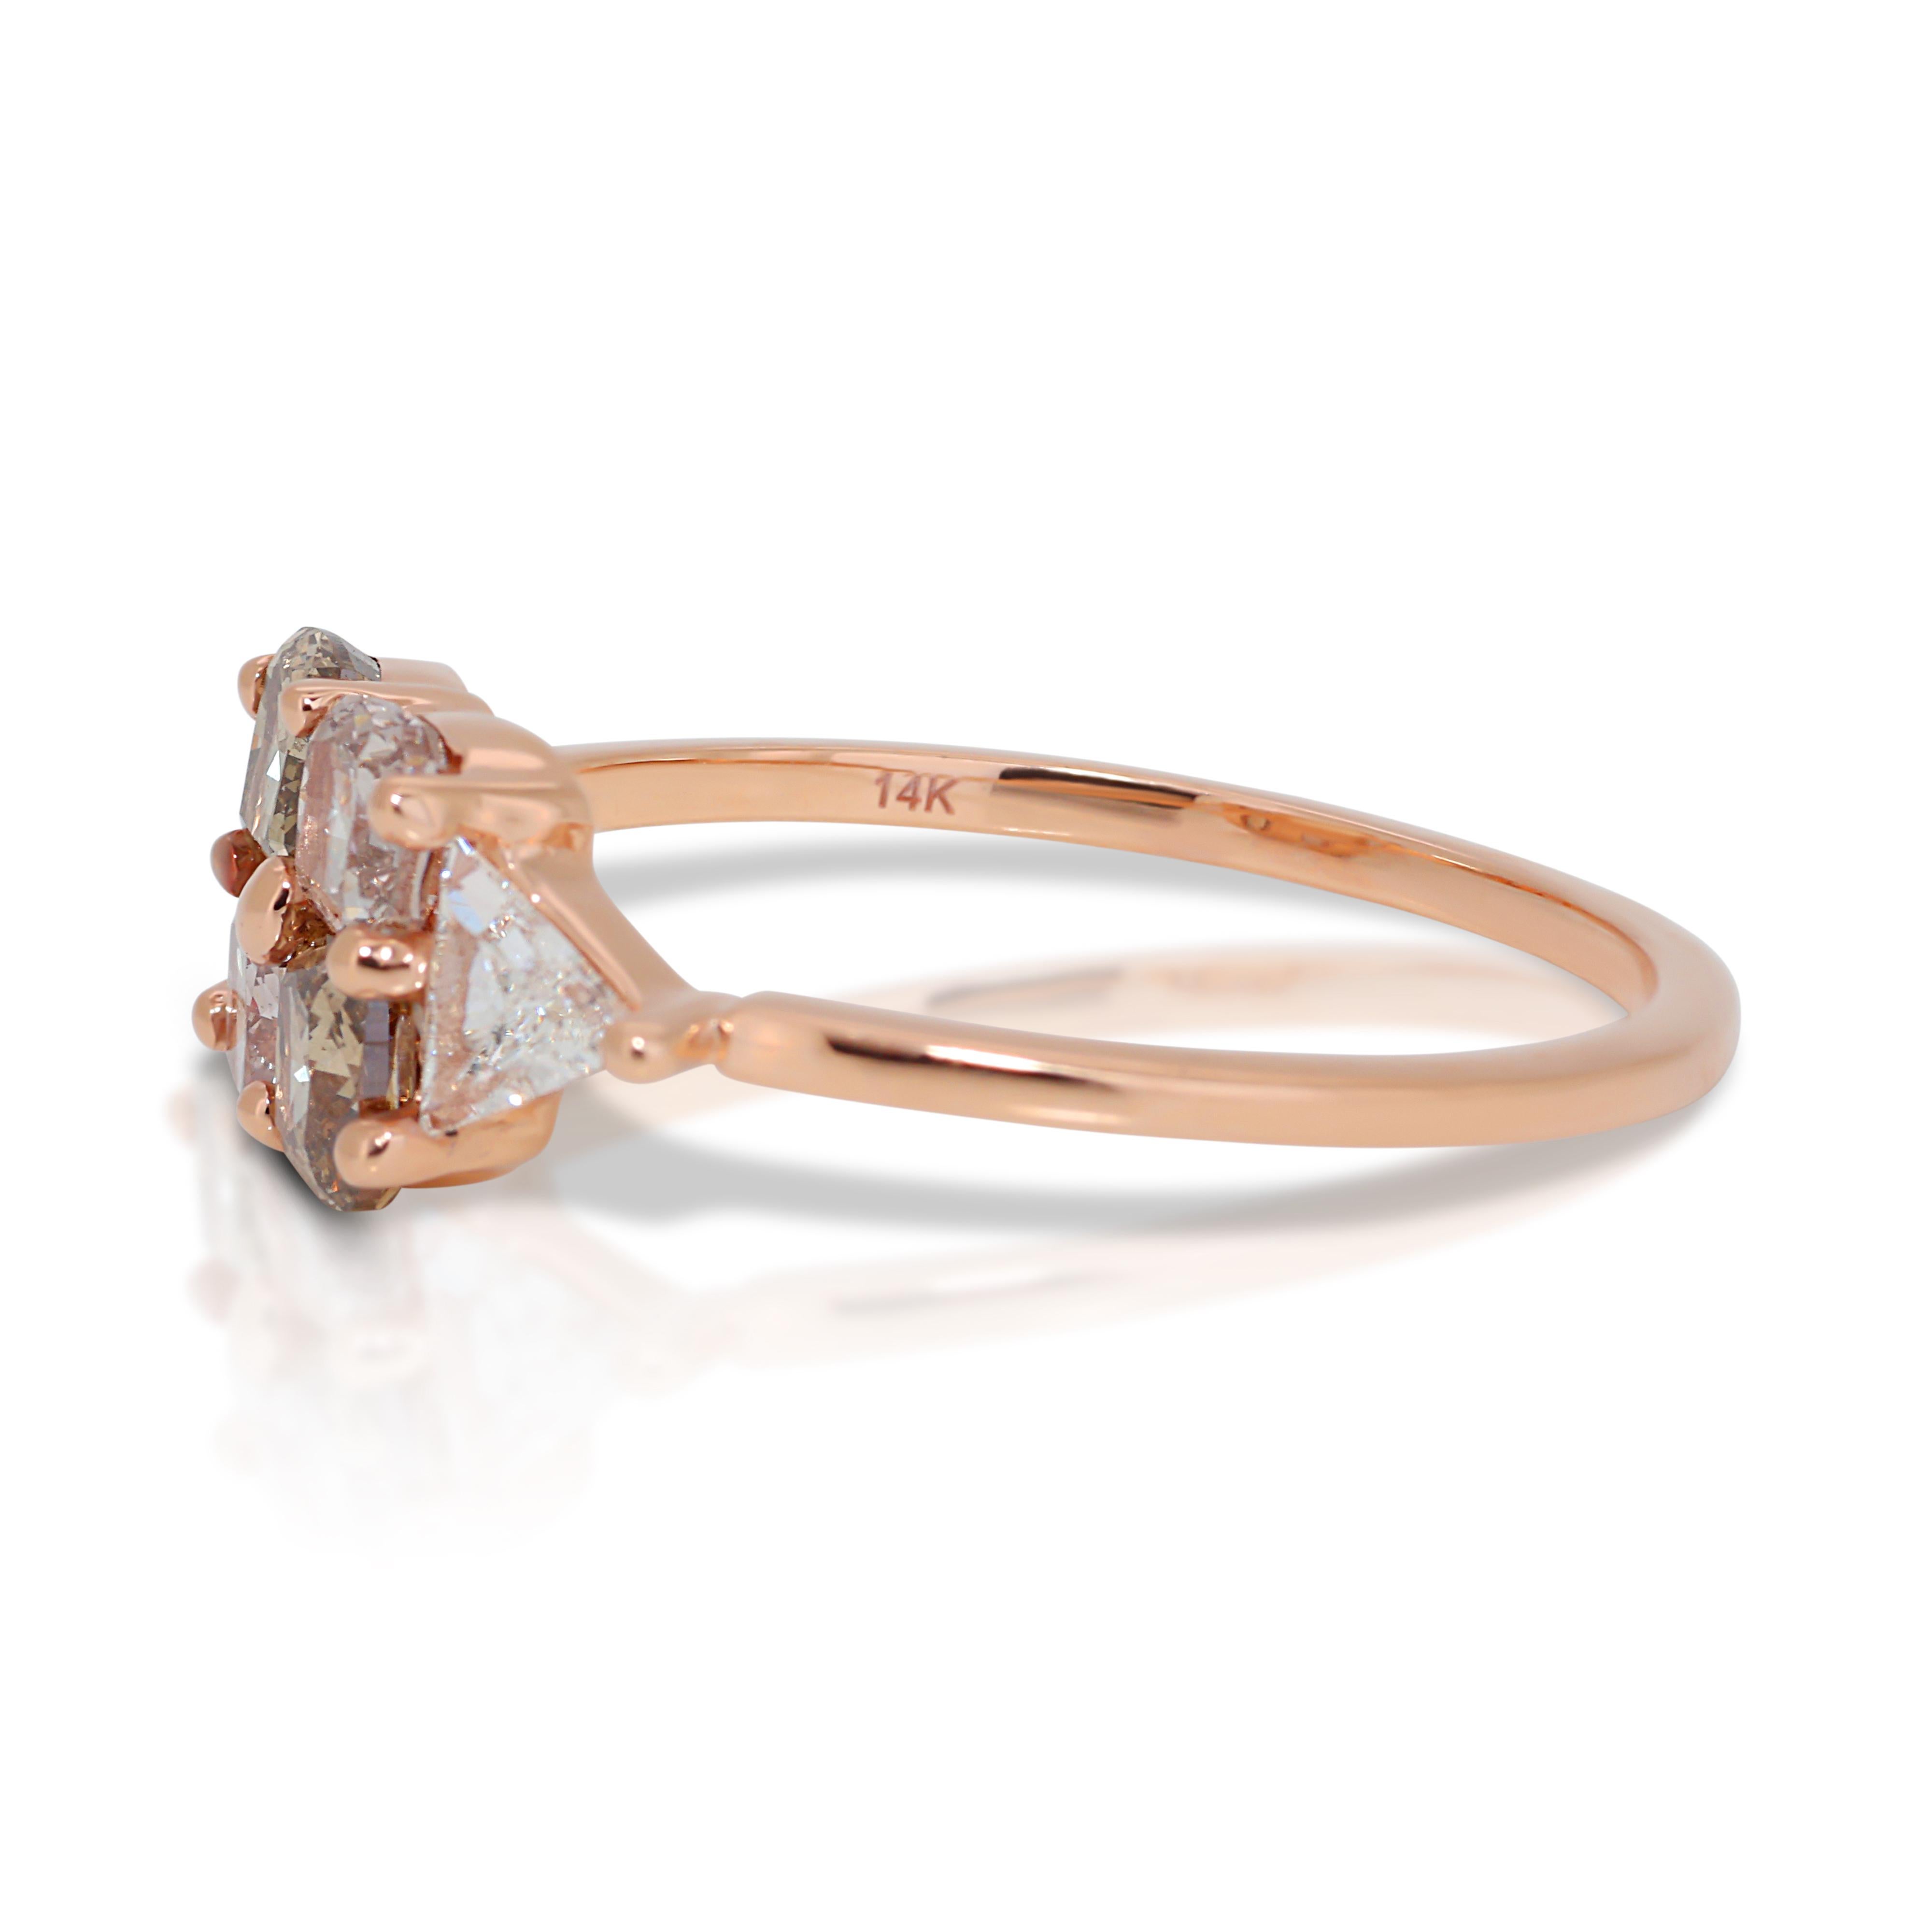 Vibrant One-of-a-Kind 14k Rose Gold Fancy-Colored Diamond Ring w/1.31 ct  In New Condition For Sale In רמת גן, IL